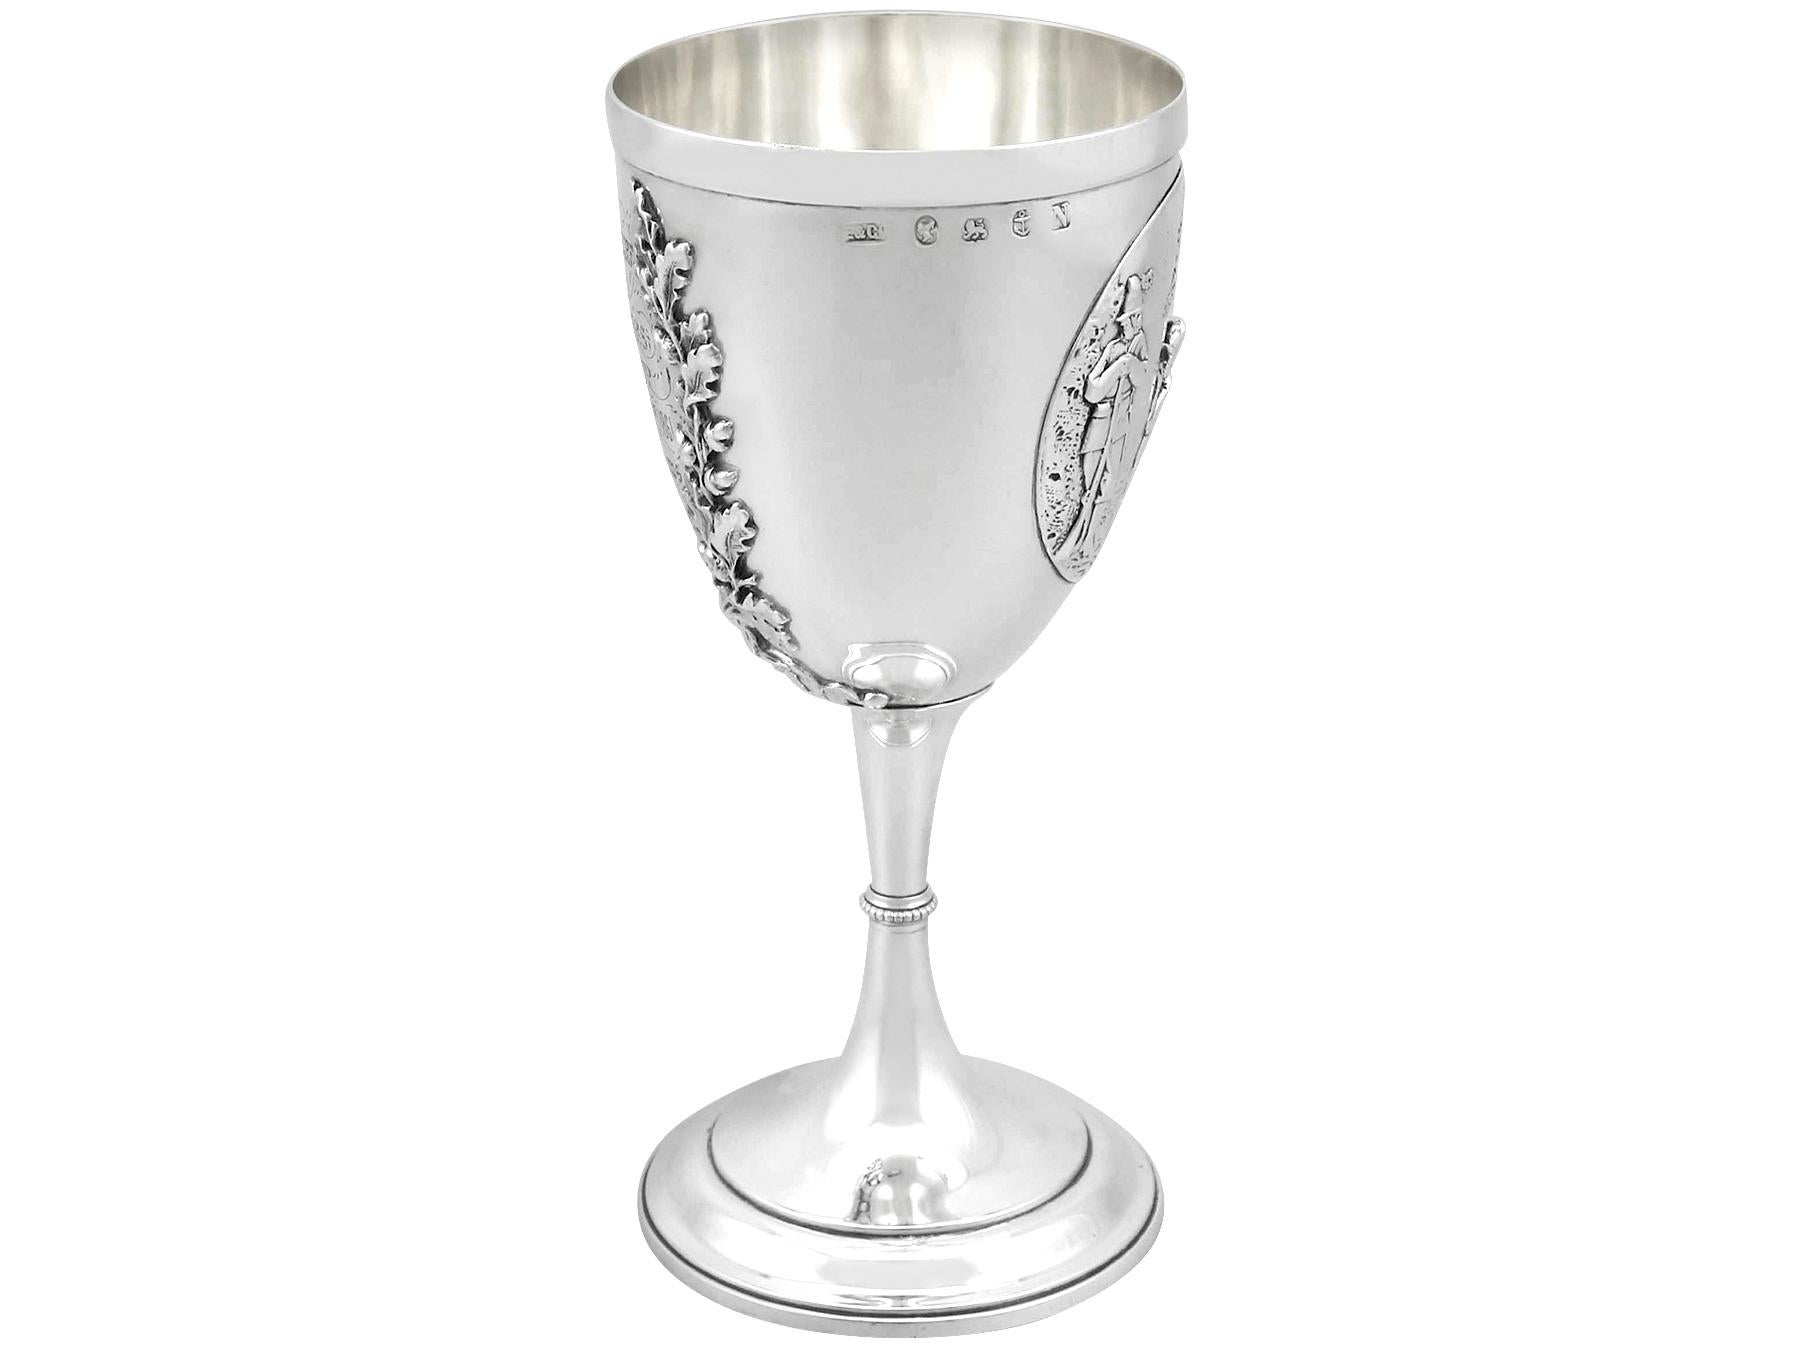 An exceptional, fine and impressive antique Victorian English sterling silver goblet; an addition to our collection of wine and drinks related silverware.

This exceptional antique sterling silver goblet has a circular bell-shaped form onto a